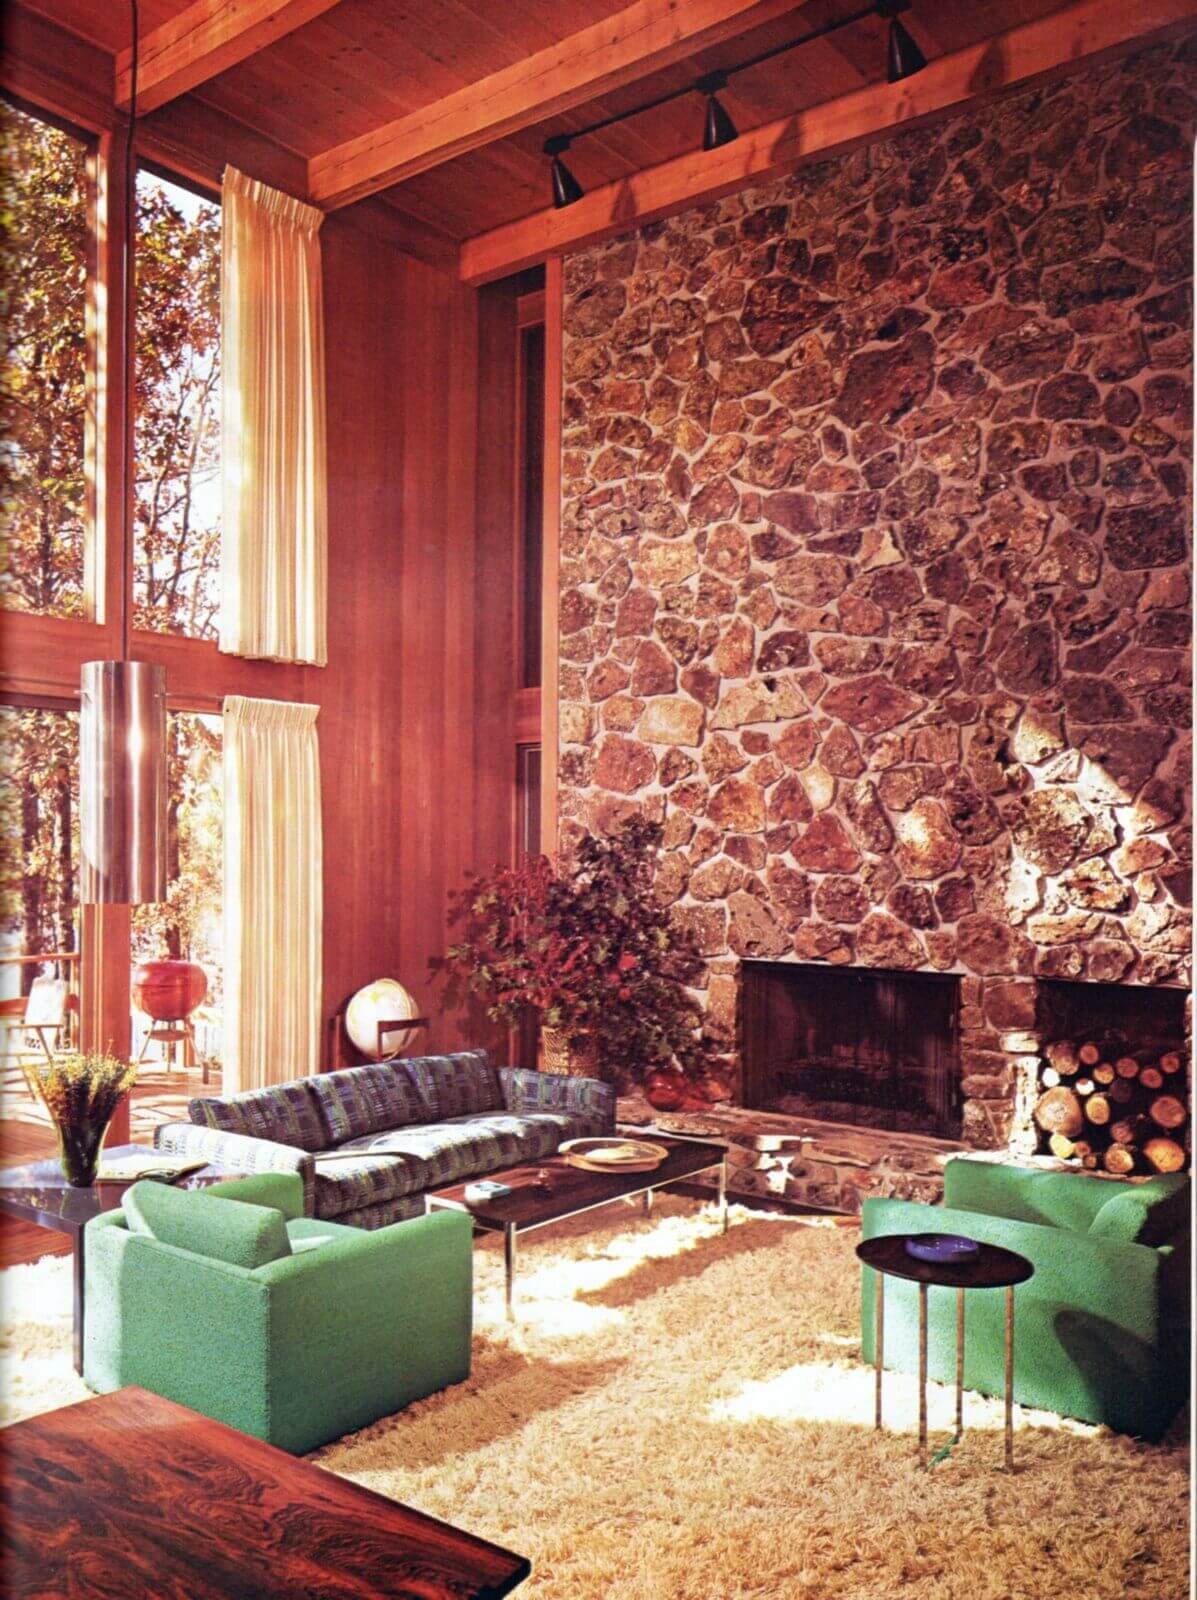 70S Interior Design : The Best Decorating Trends From The 70s 70s Decorating Ideas / There are 2555 70's interior design for sale on etsy, and they cost $57.33 on average.